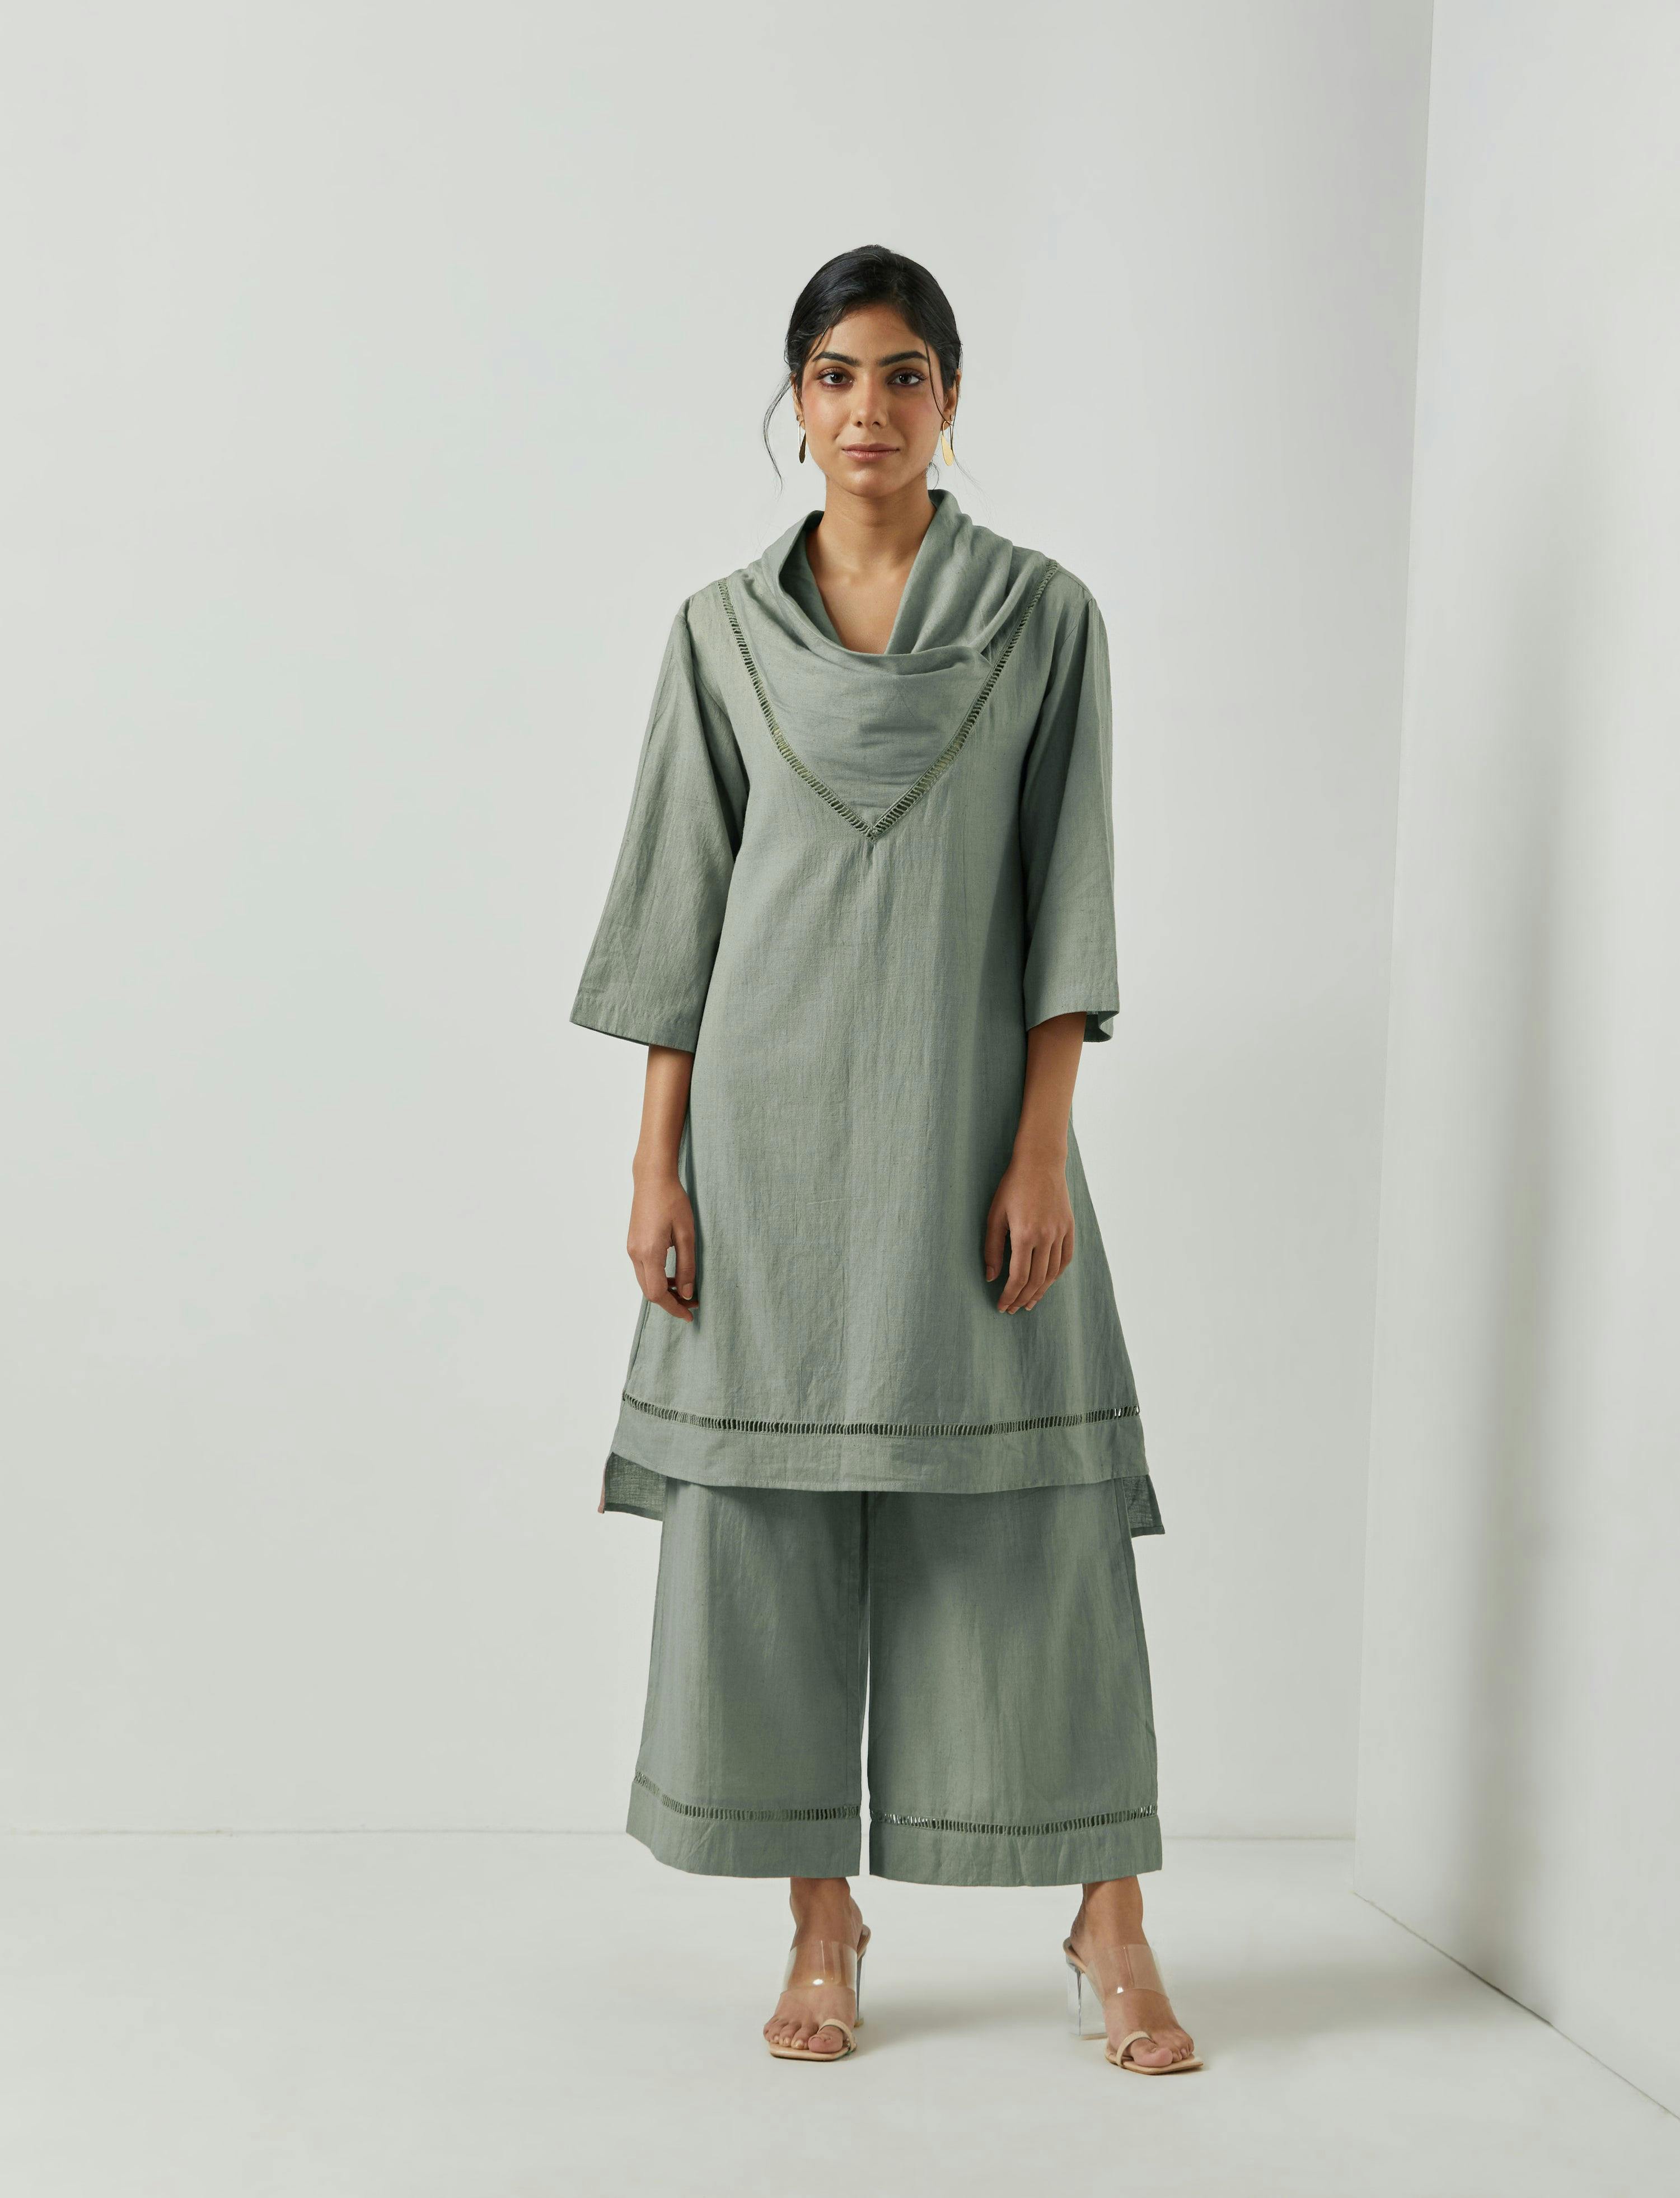 PALE OLIVE FOLIO TUNIC - 1 PC, a product by MARKKAH STUDIO